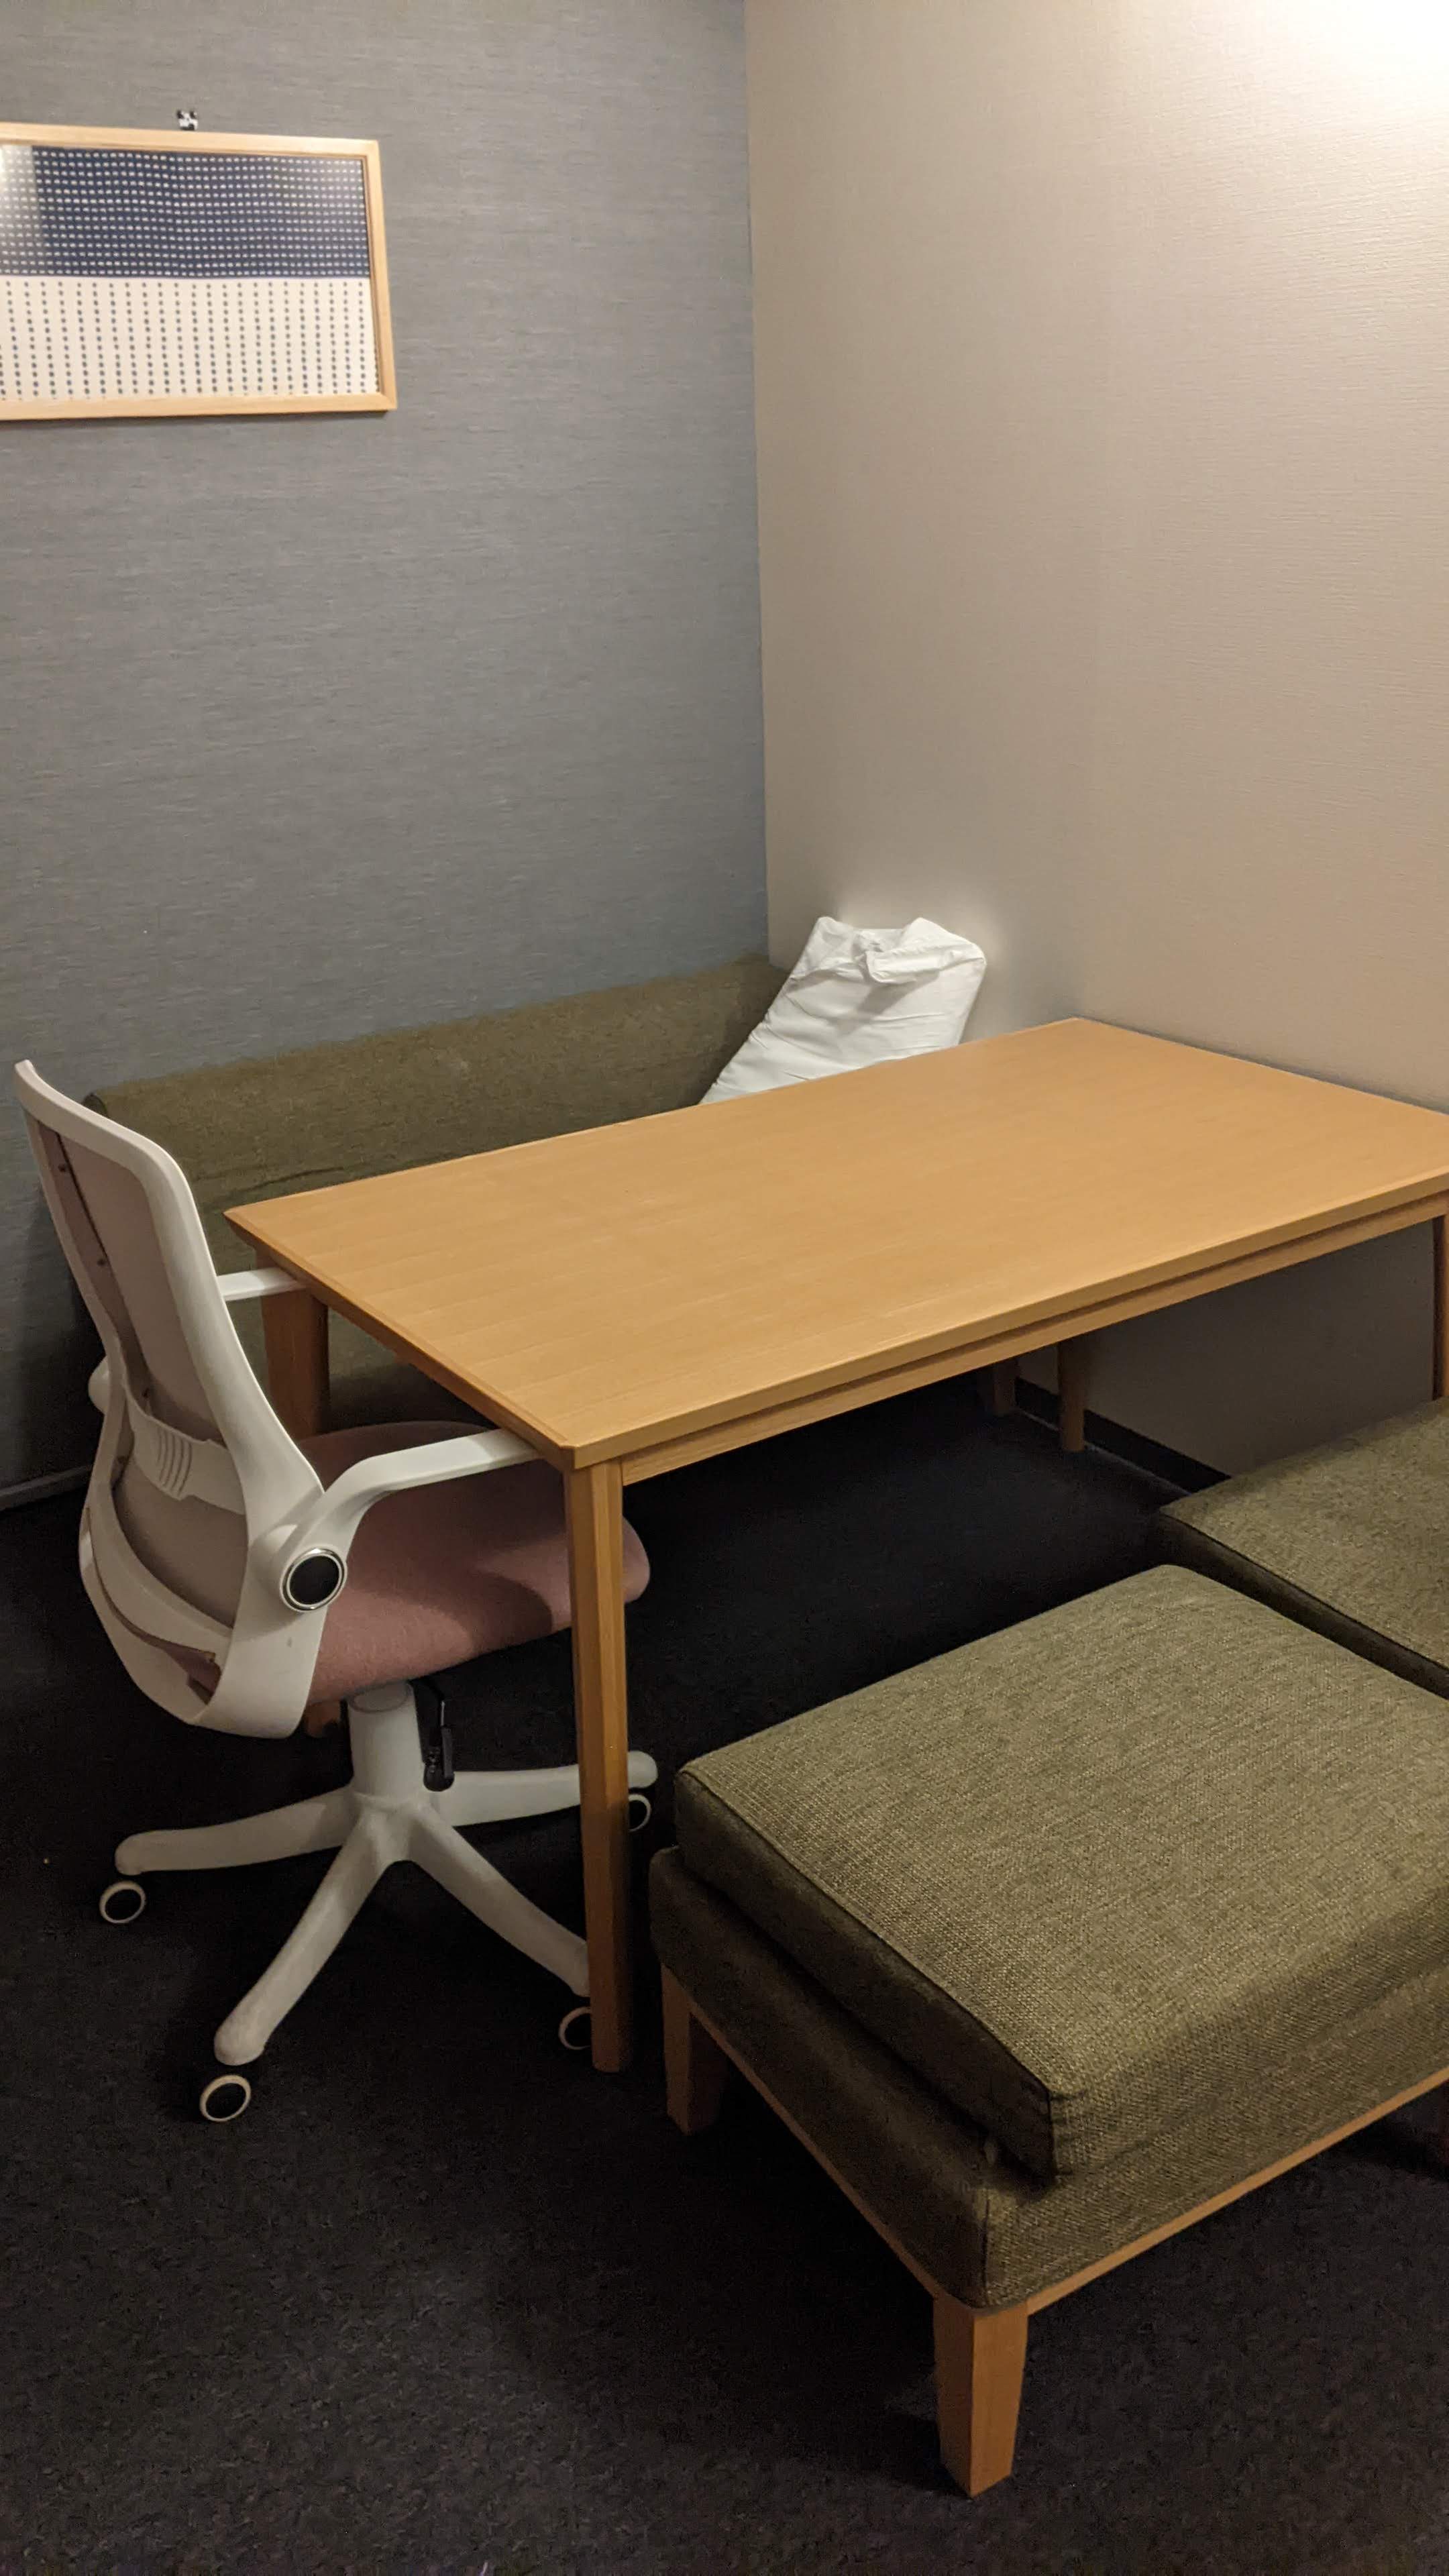 table and bench seating with an office chair